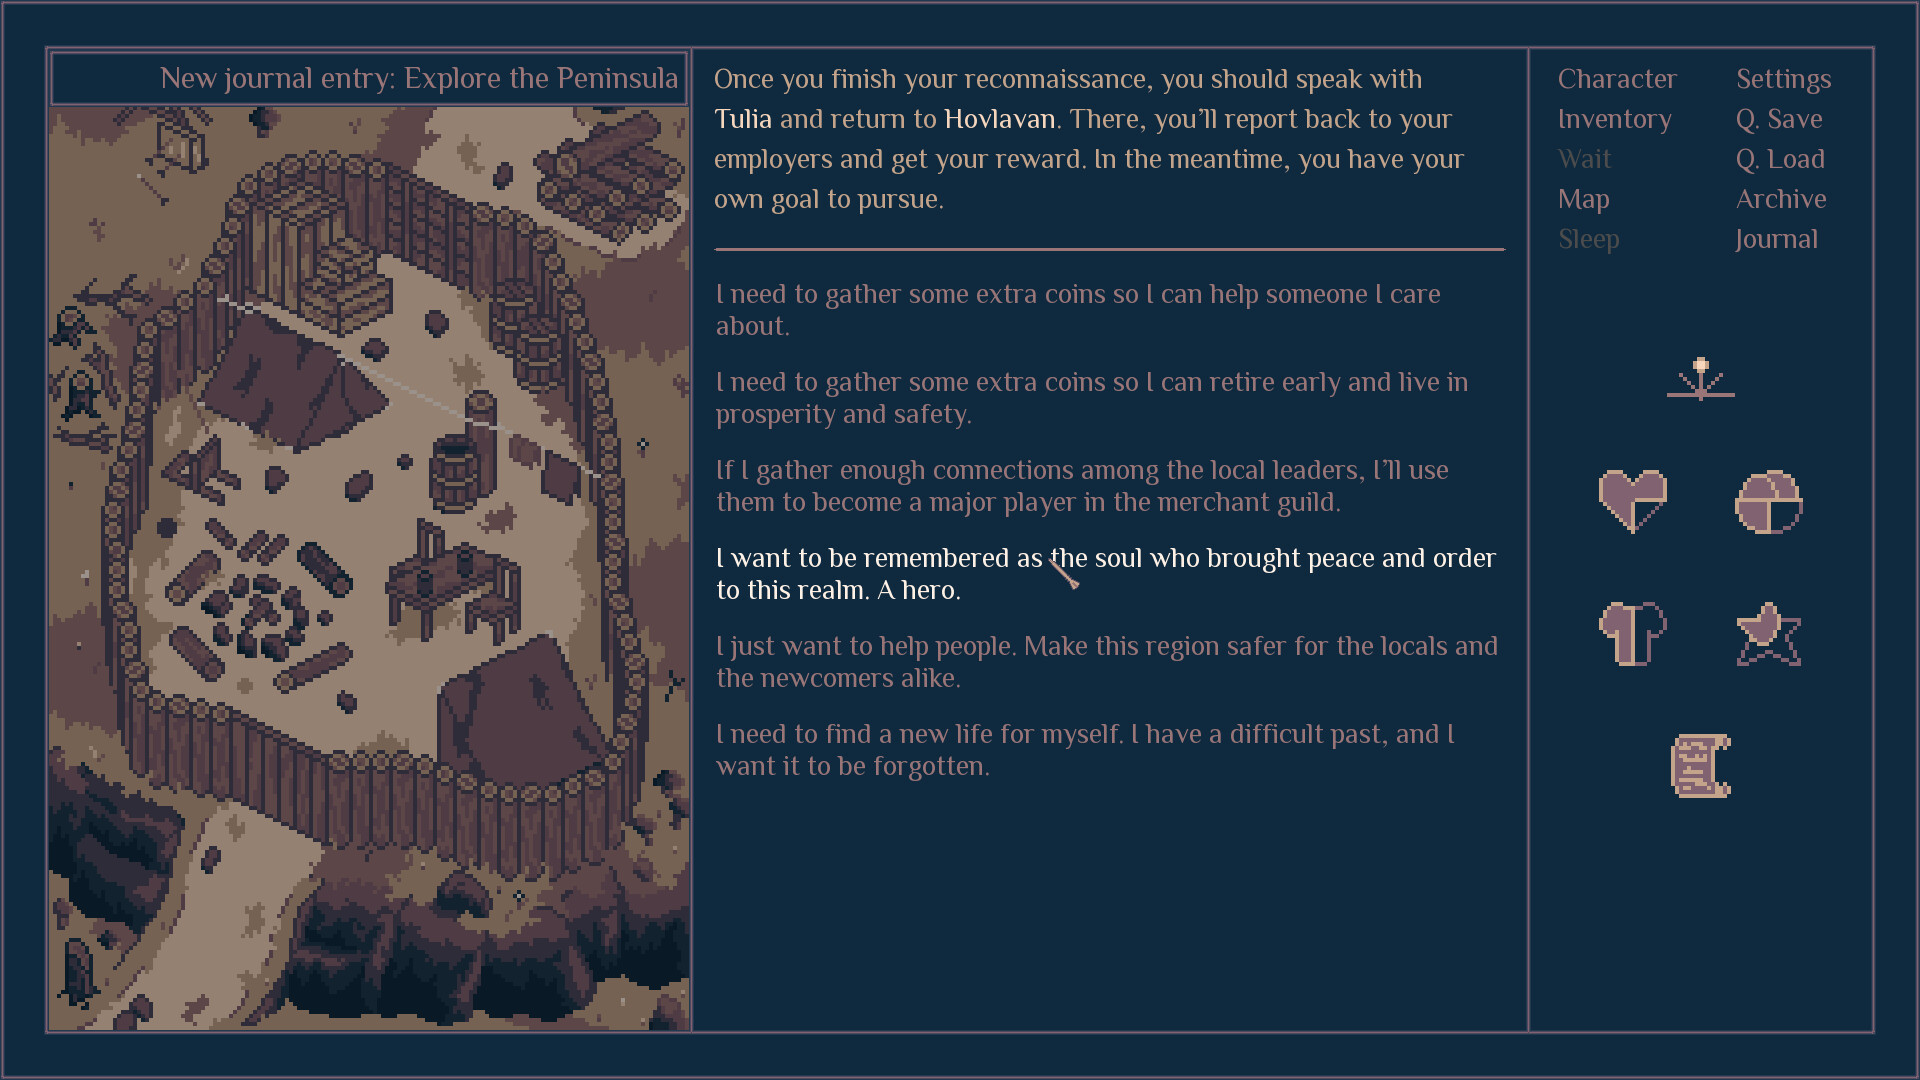 Left side has a pixelated image of a fortified camp. The middle column has text that describes the scene, its characters, the dialogue, and choices for the player. The right panel is the stats of the character and menu options.